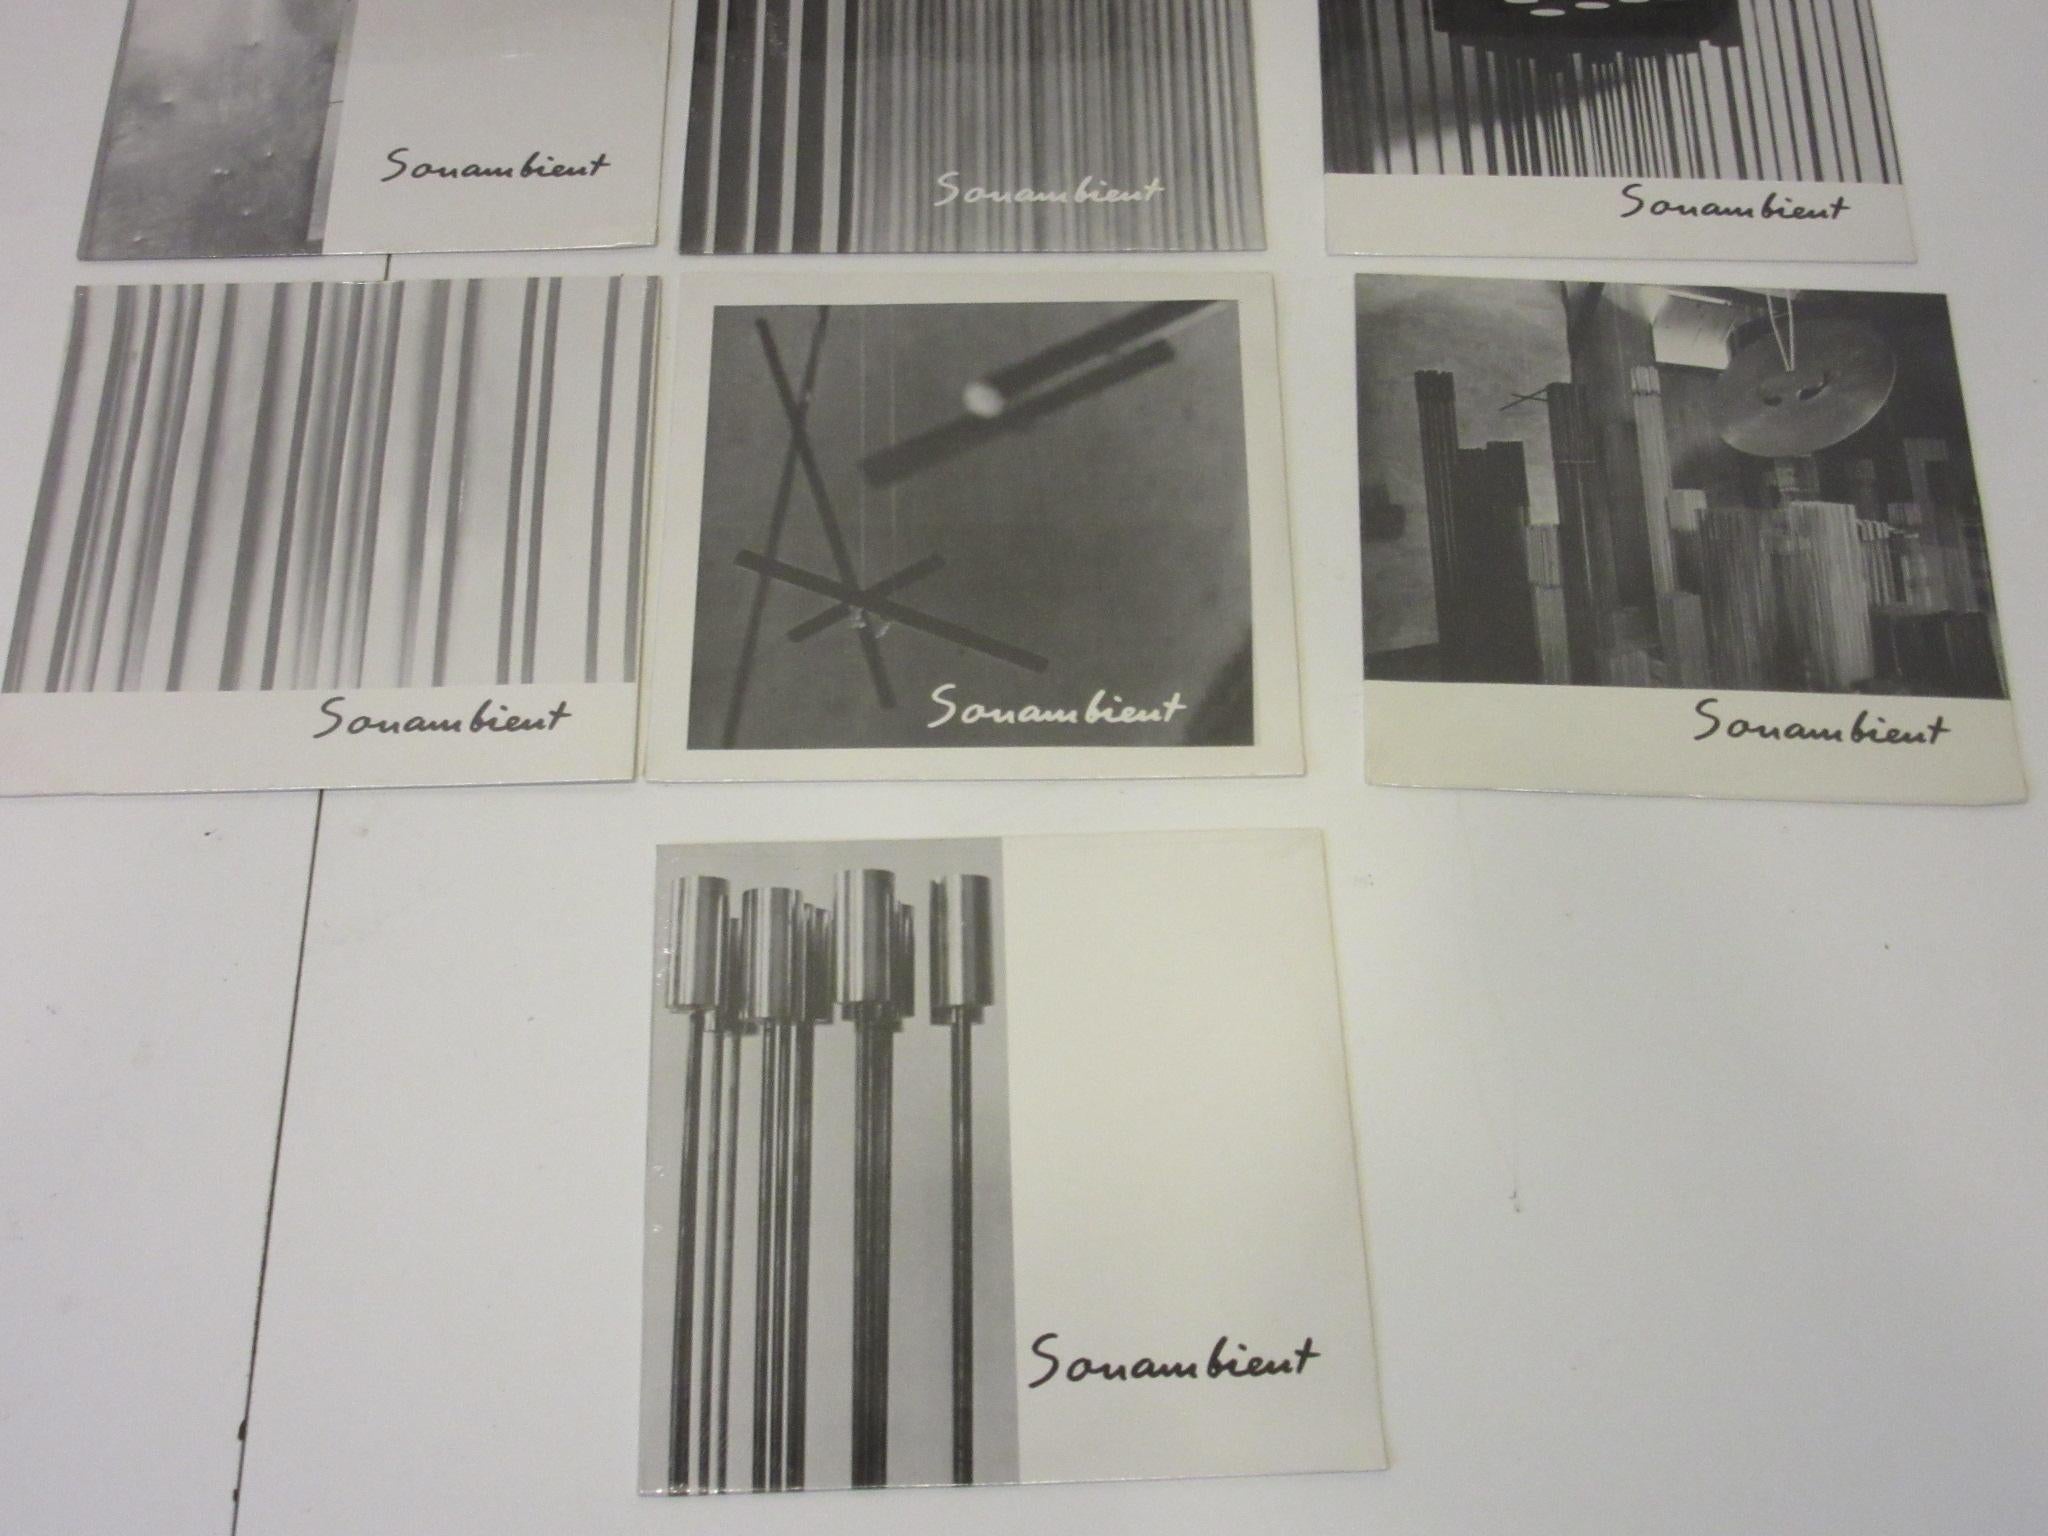 Mid-Century Modern Harry Bertoia Sonambient Sculpture Sound Record Collection